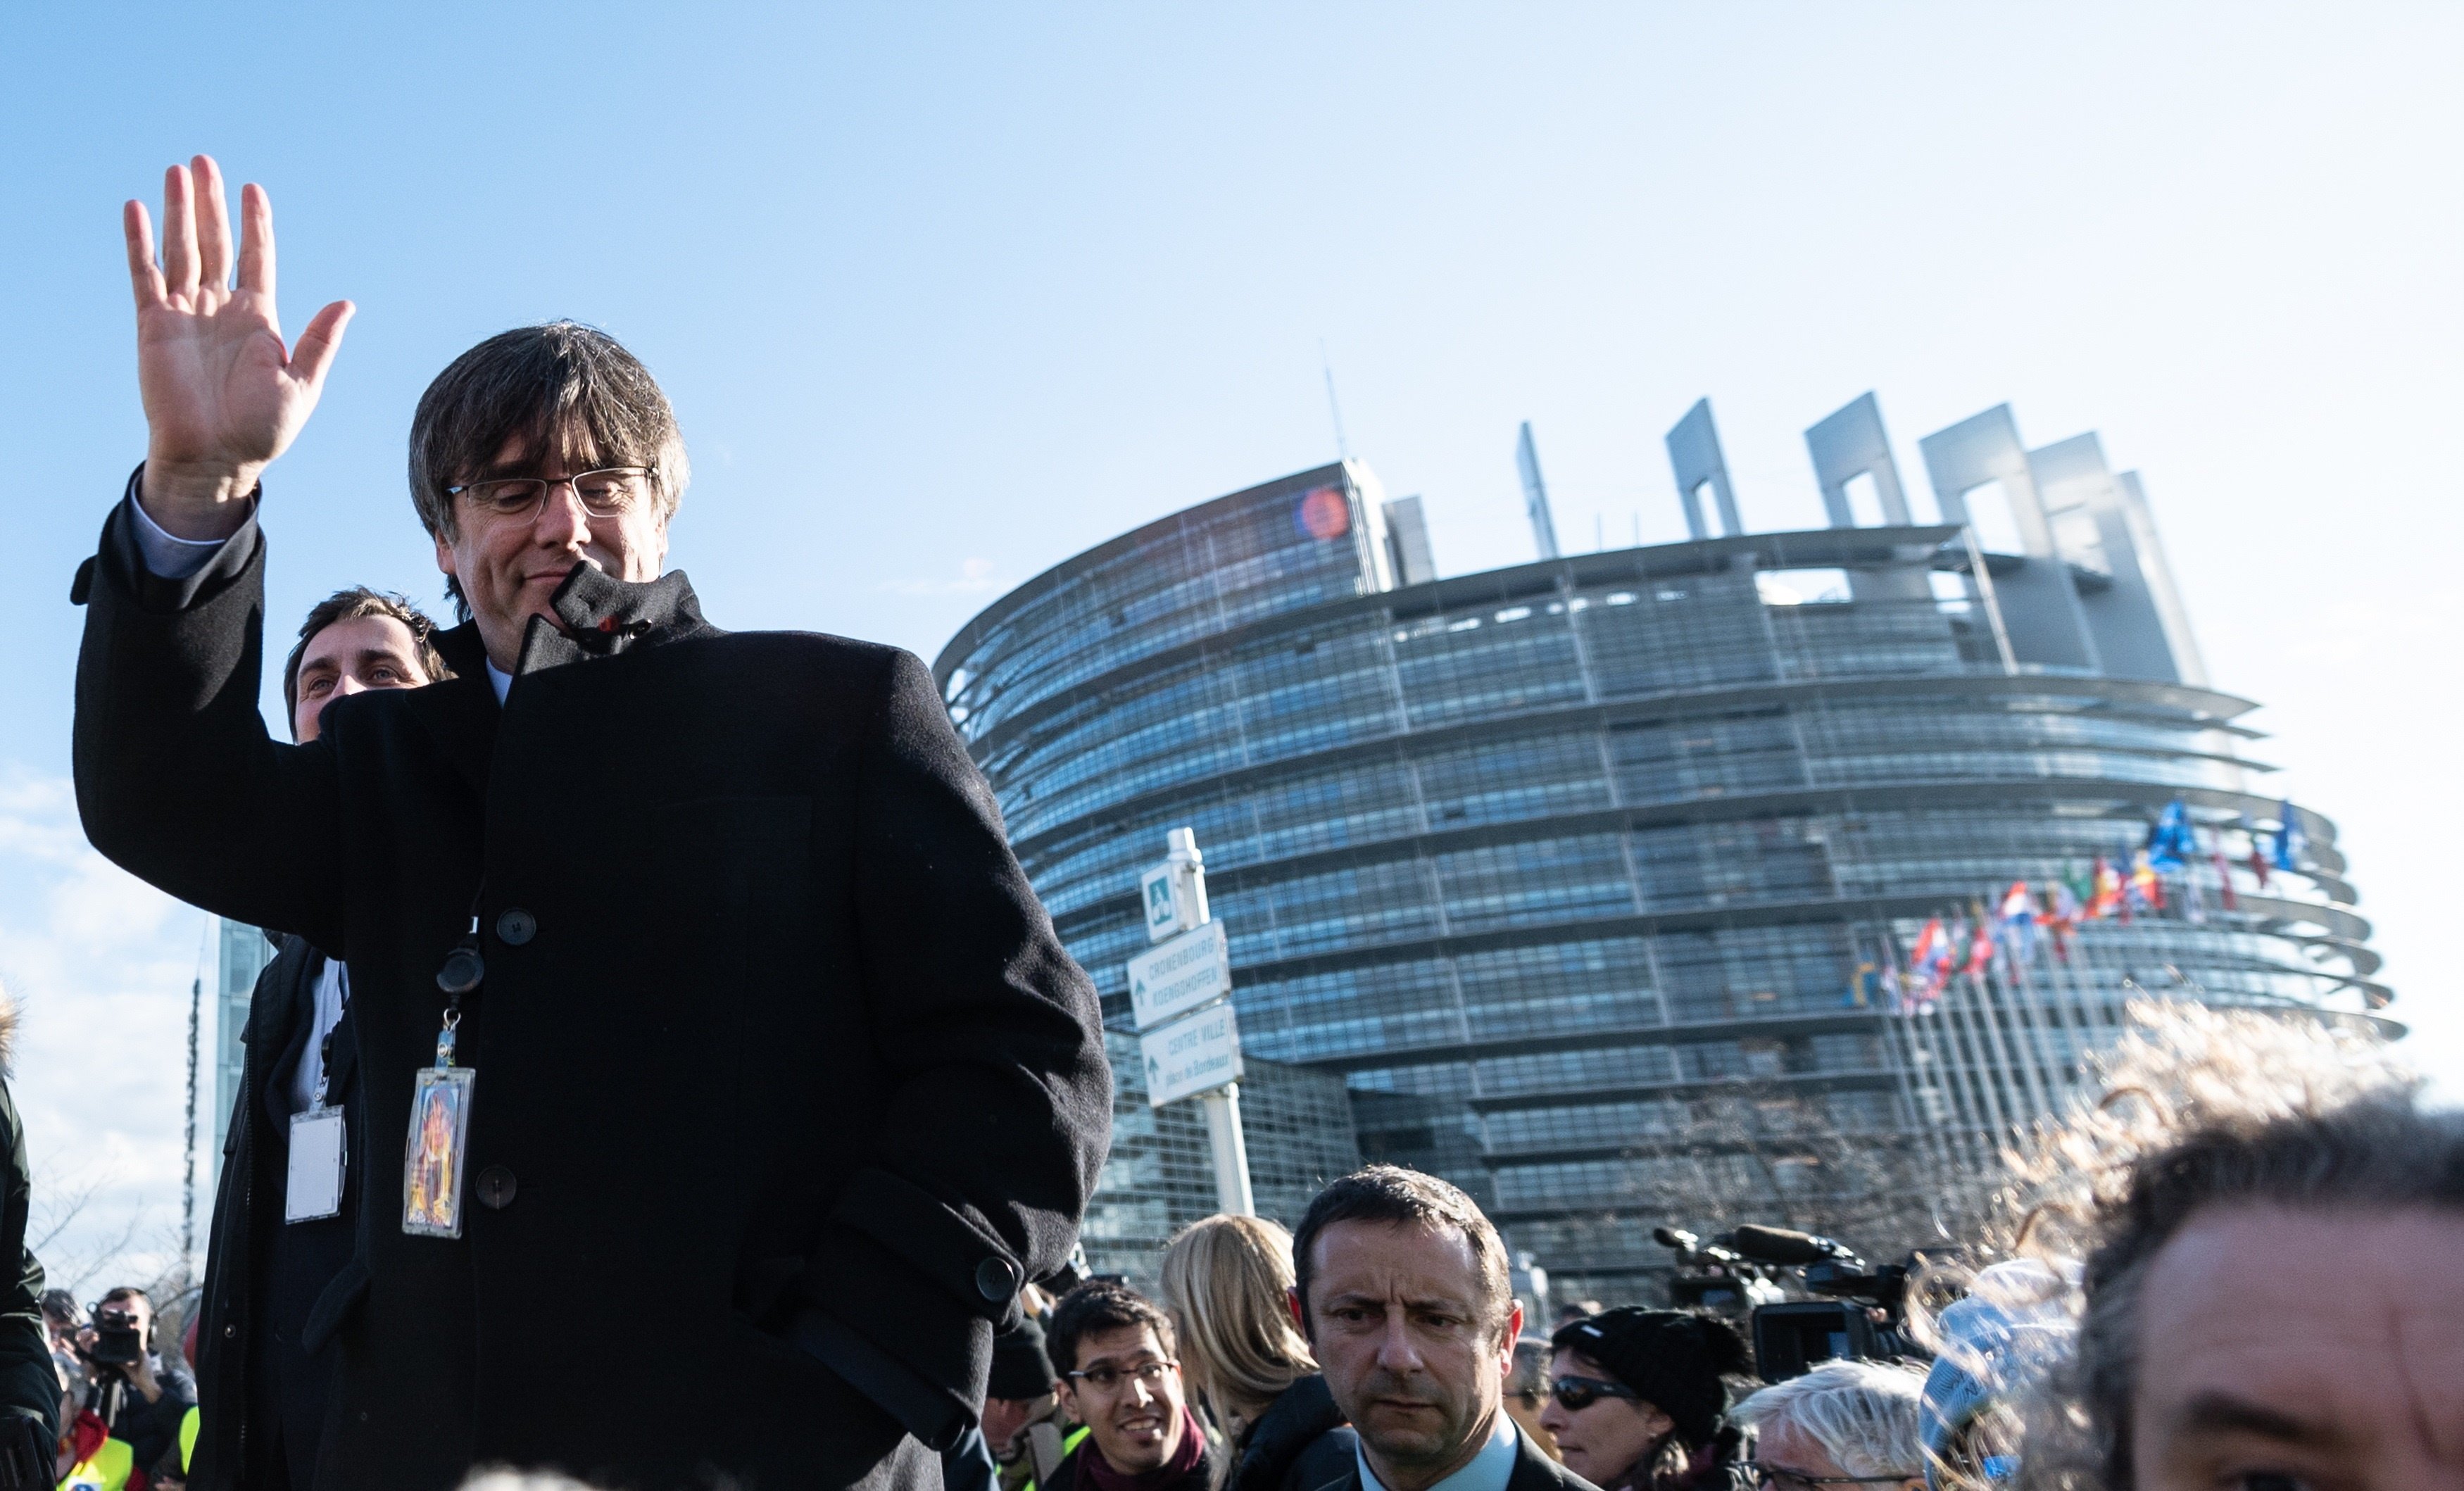 Puigdemont denounces "threats, insults and hate messages" to his MEP inbox